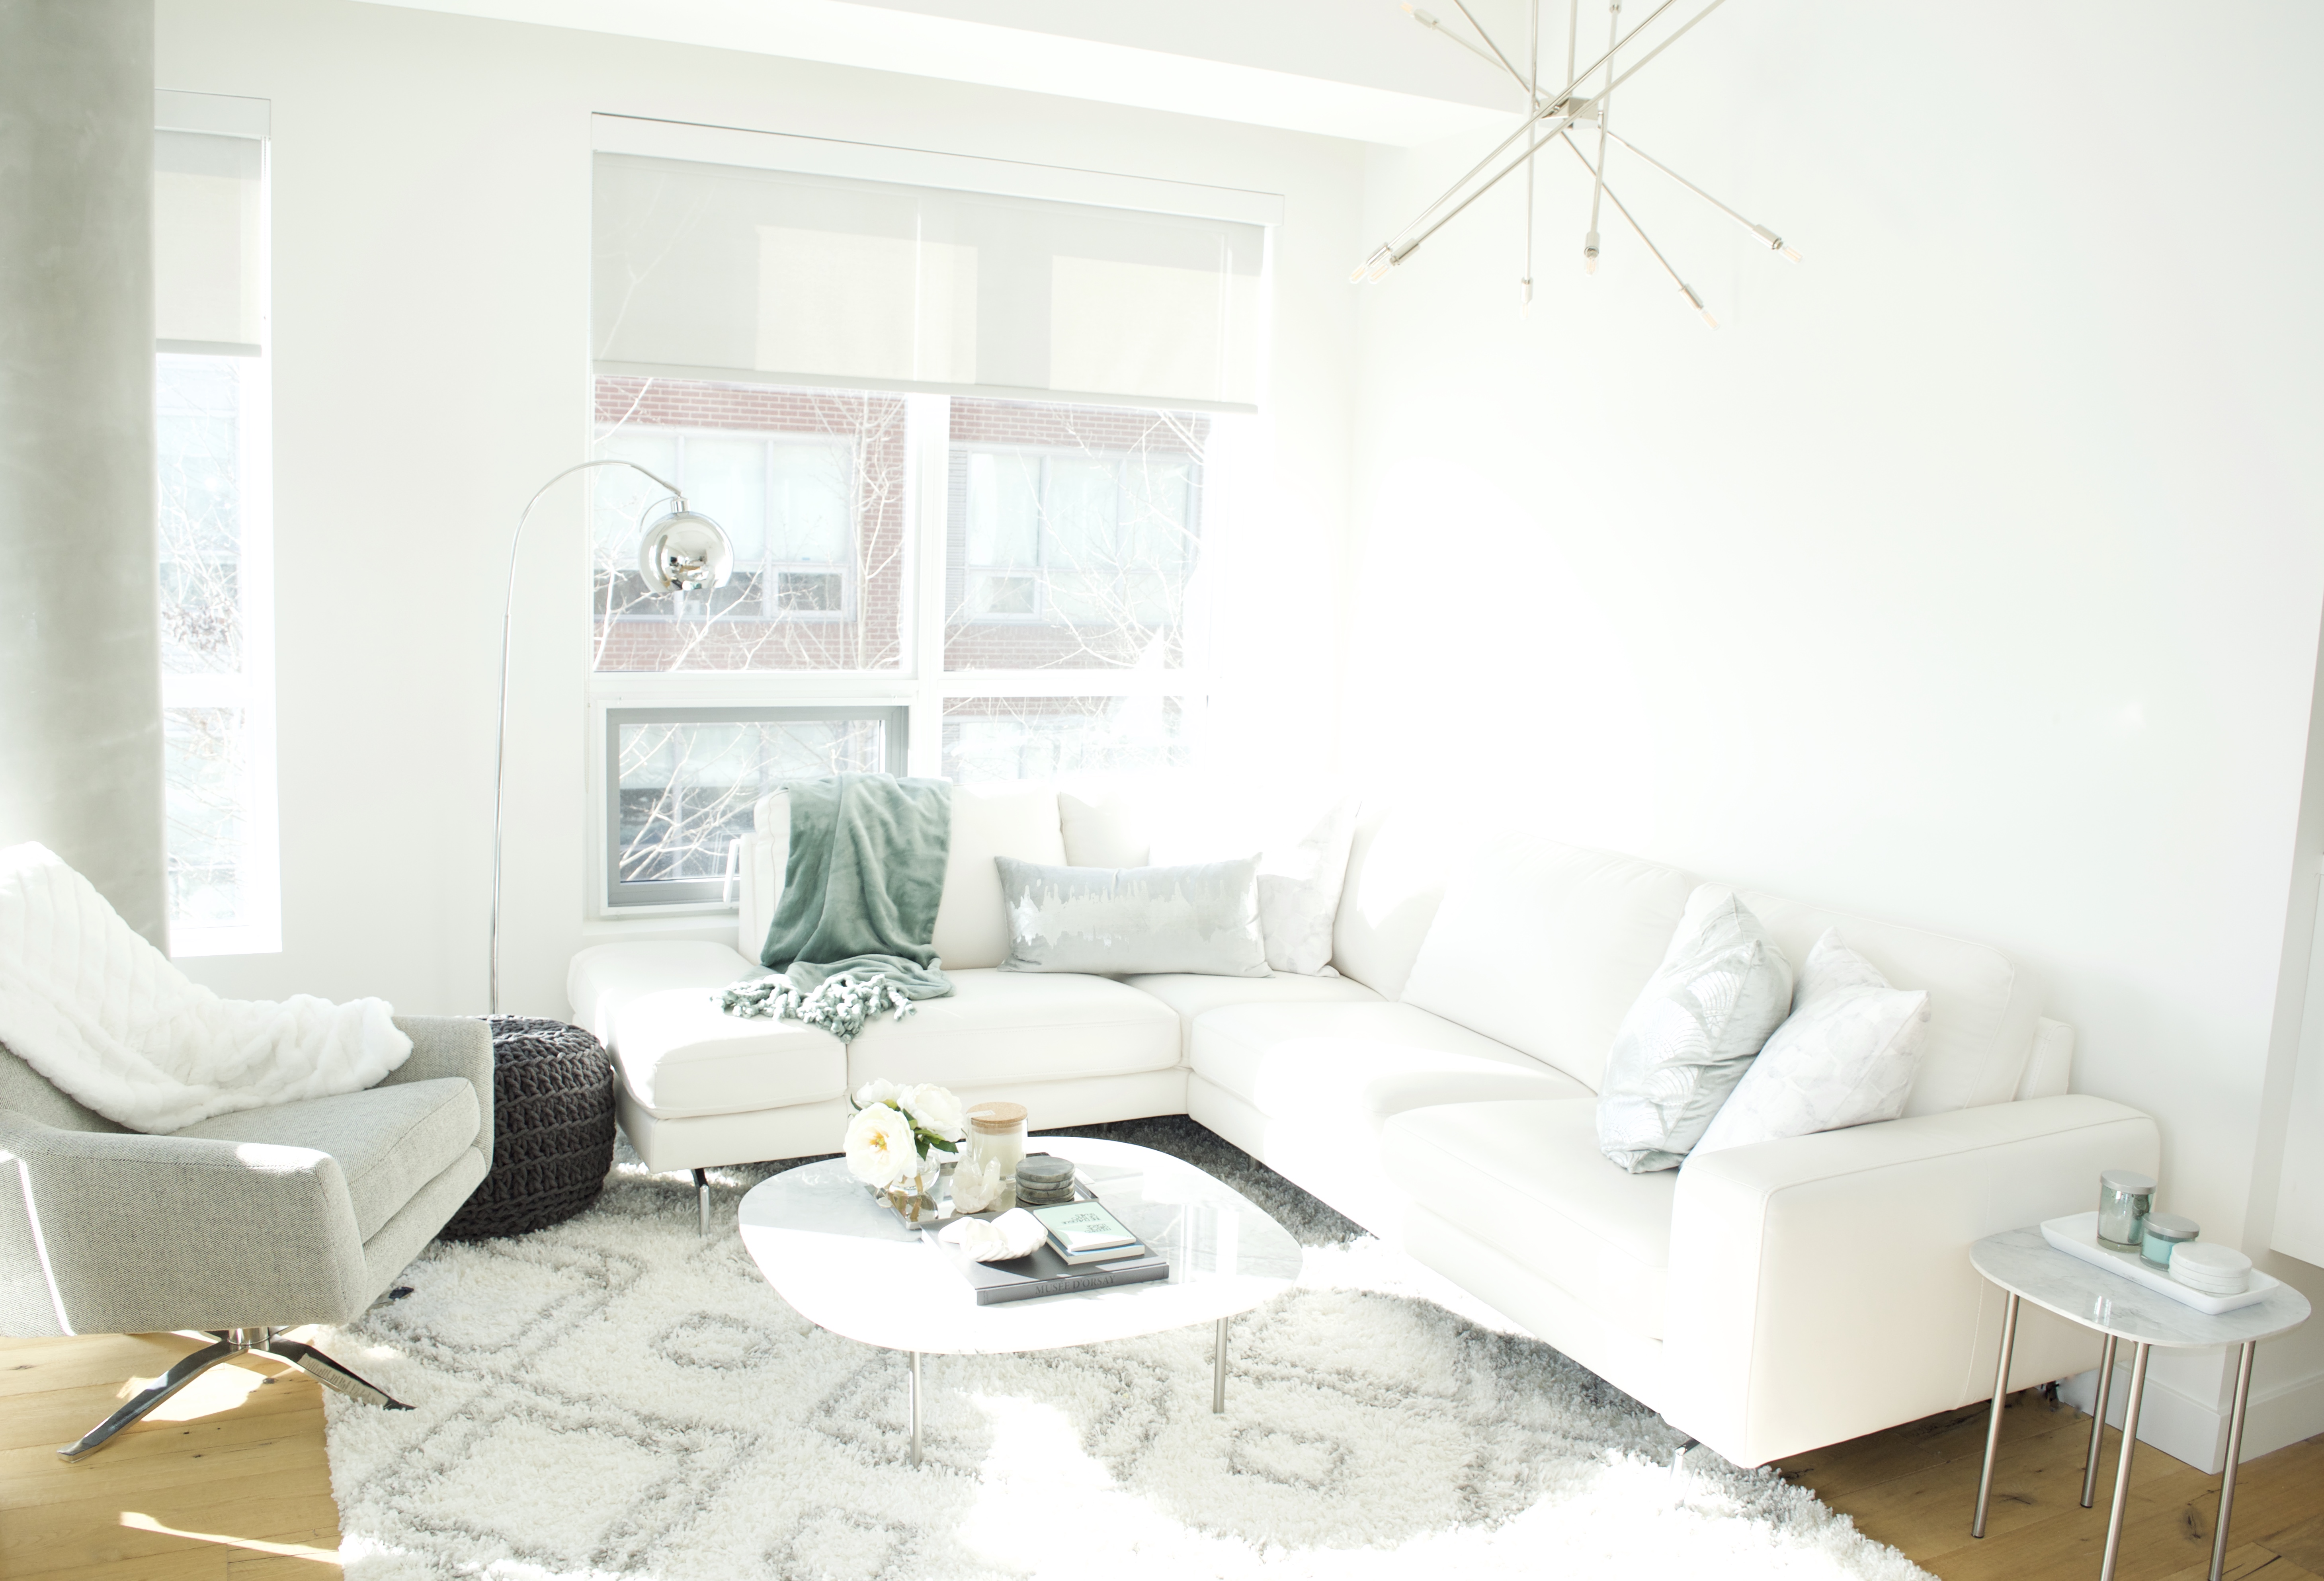 modern scandinavian scandi glam white grey black ivory concrete pillar design swivel chair sectional silver decor living room apartment small space marble table white leather sectional seafoam green pastel soft bright white paint calgary interior designer home by freya maclean pouf ottoman knit arc lamp